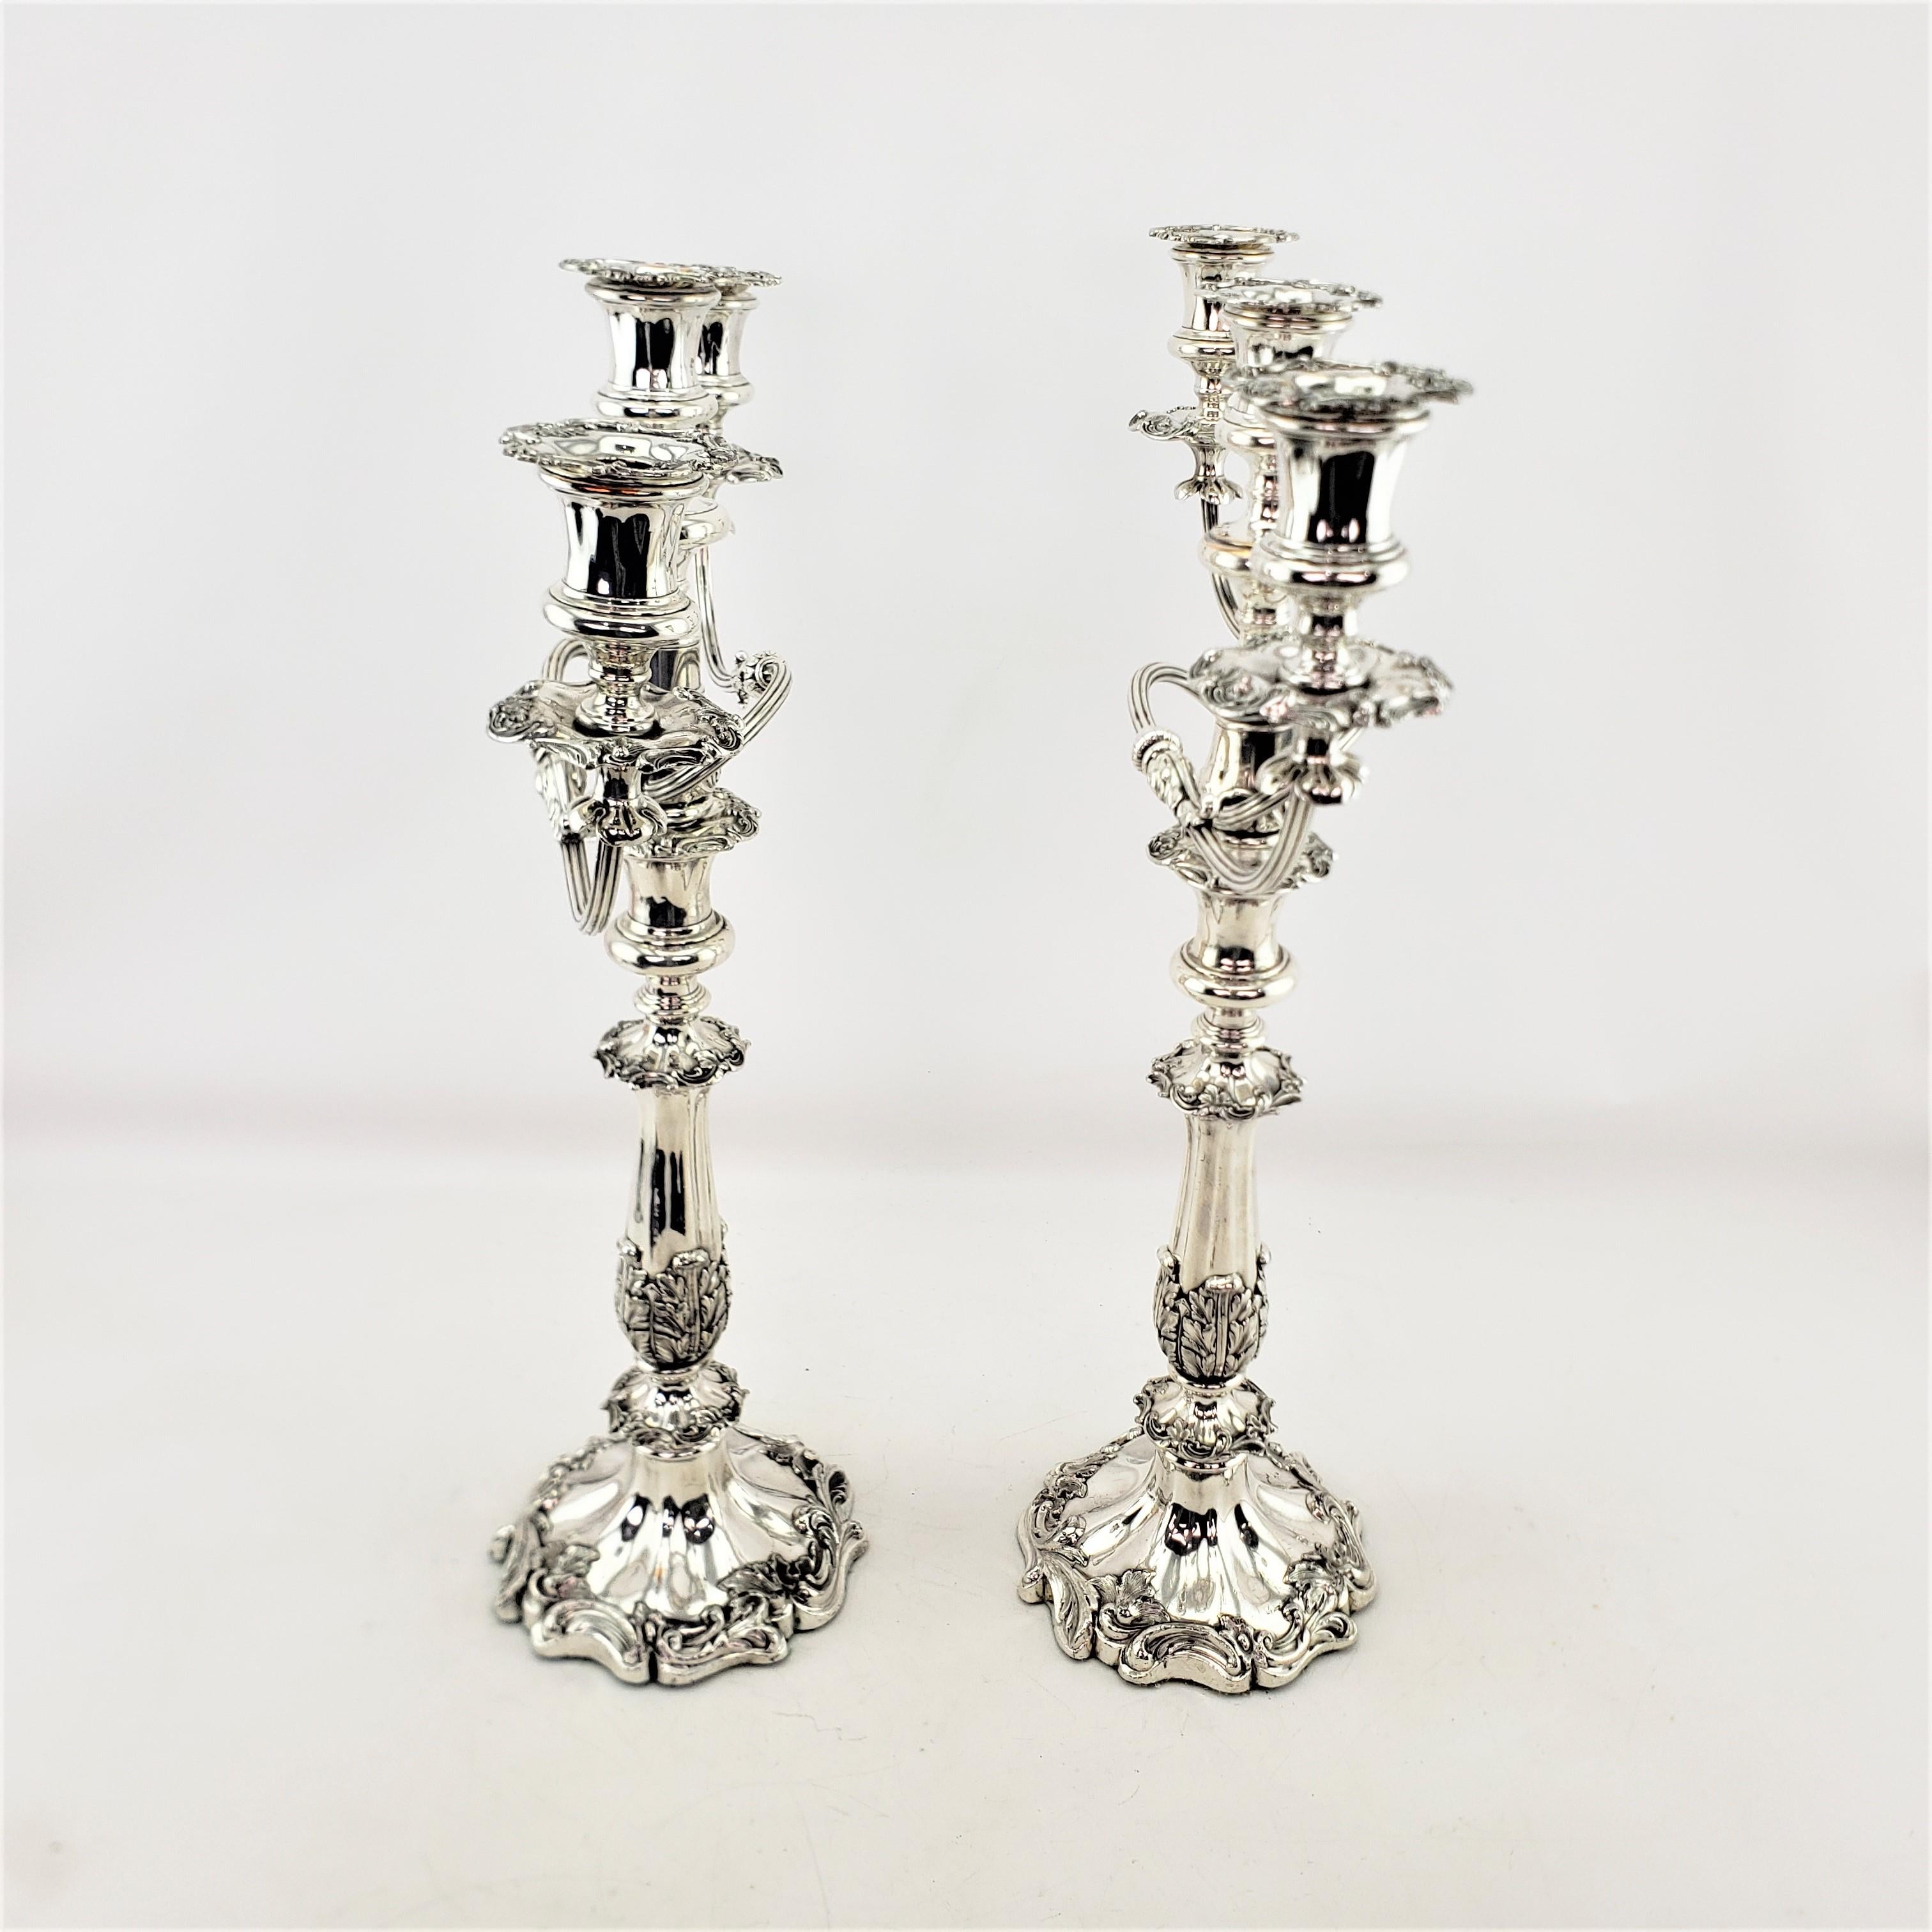 Machine-Made Antique Silver Plated Convertible Candelabras or Candlesticks with Leaf Decor For Sale